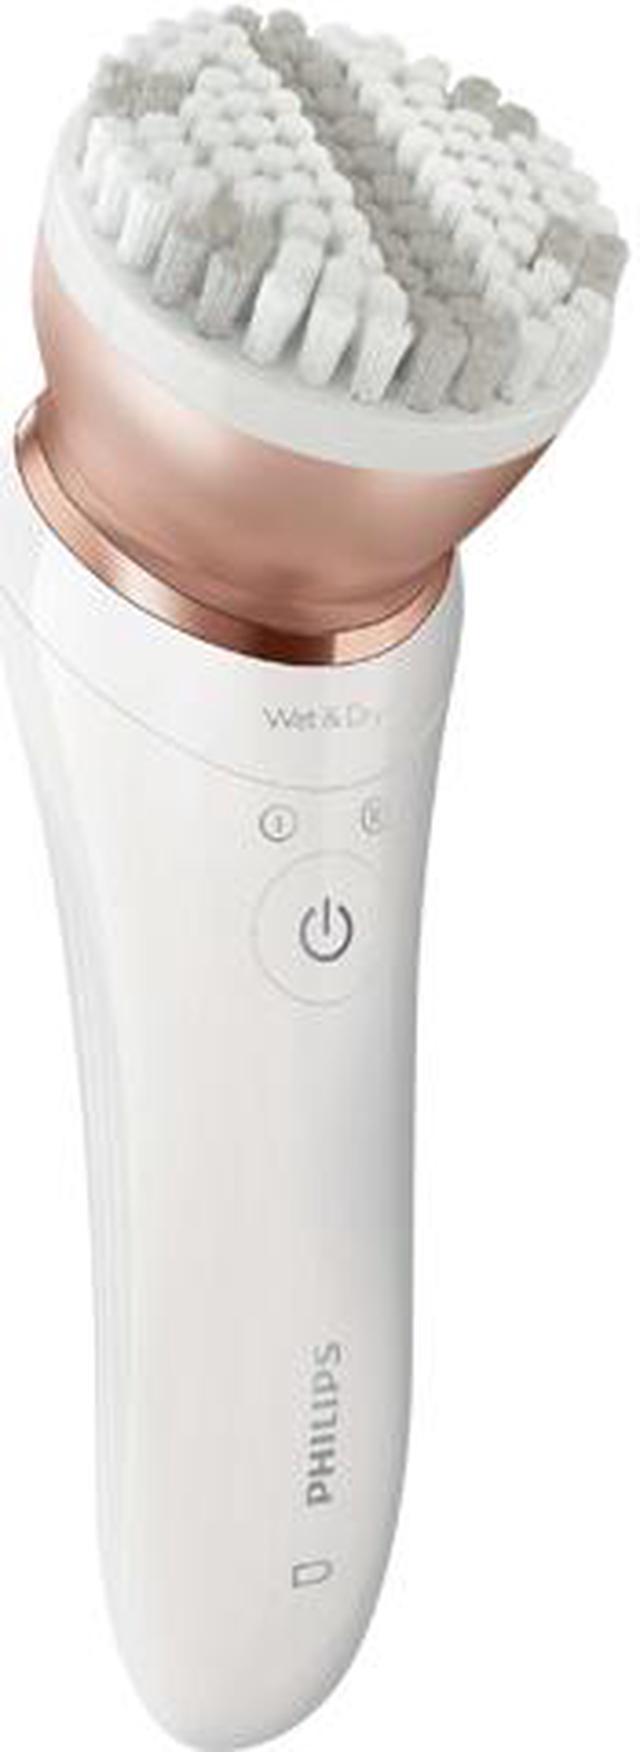 Philips Satinelle Prestige Epilator, Wet & Dry Electric Hair Removal, Body  Exfoliation and Massage (BRE648) 